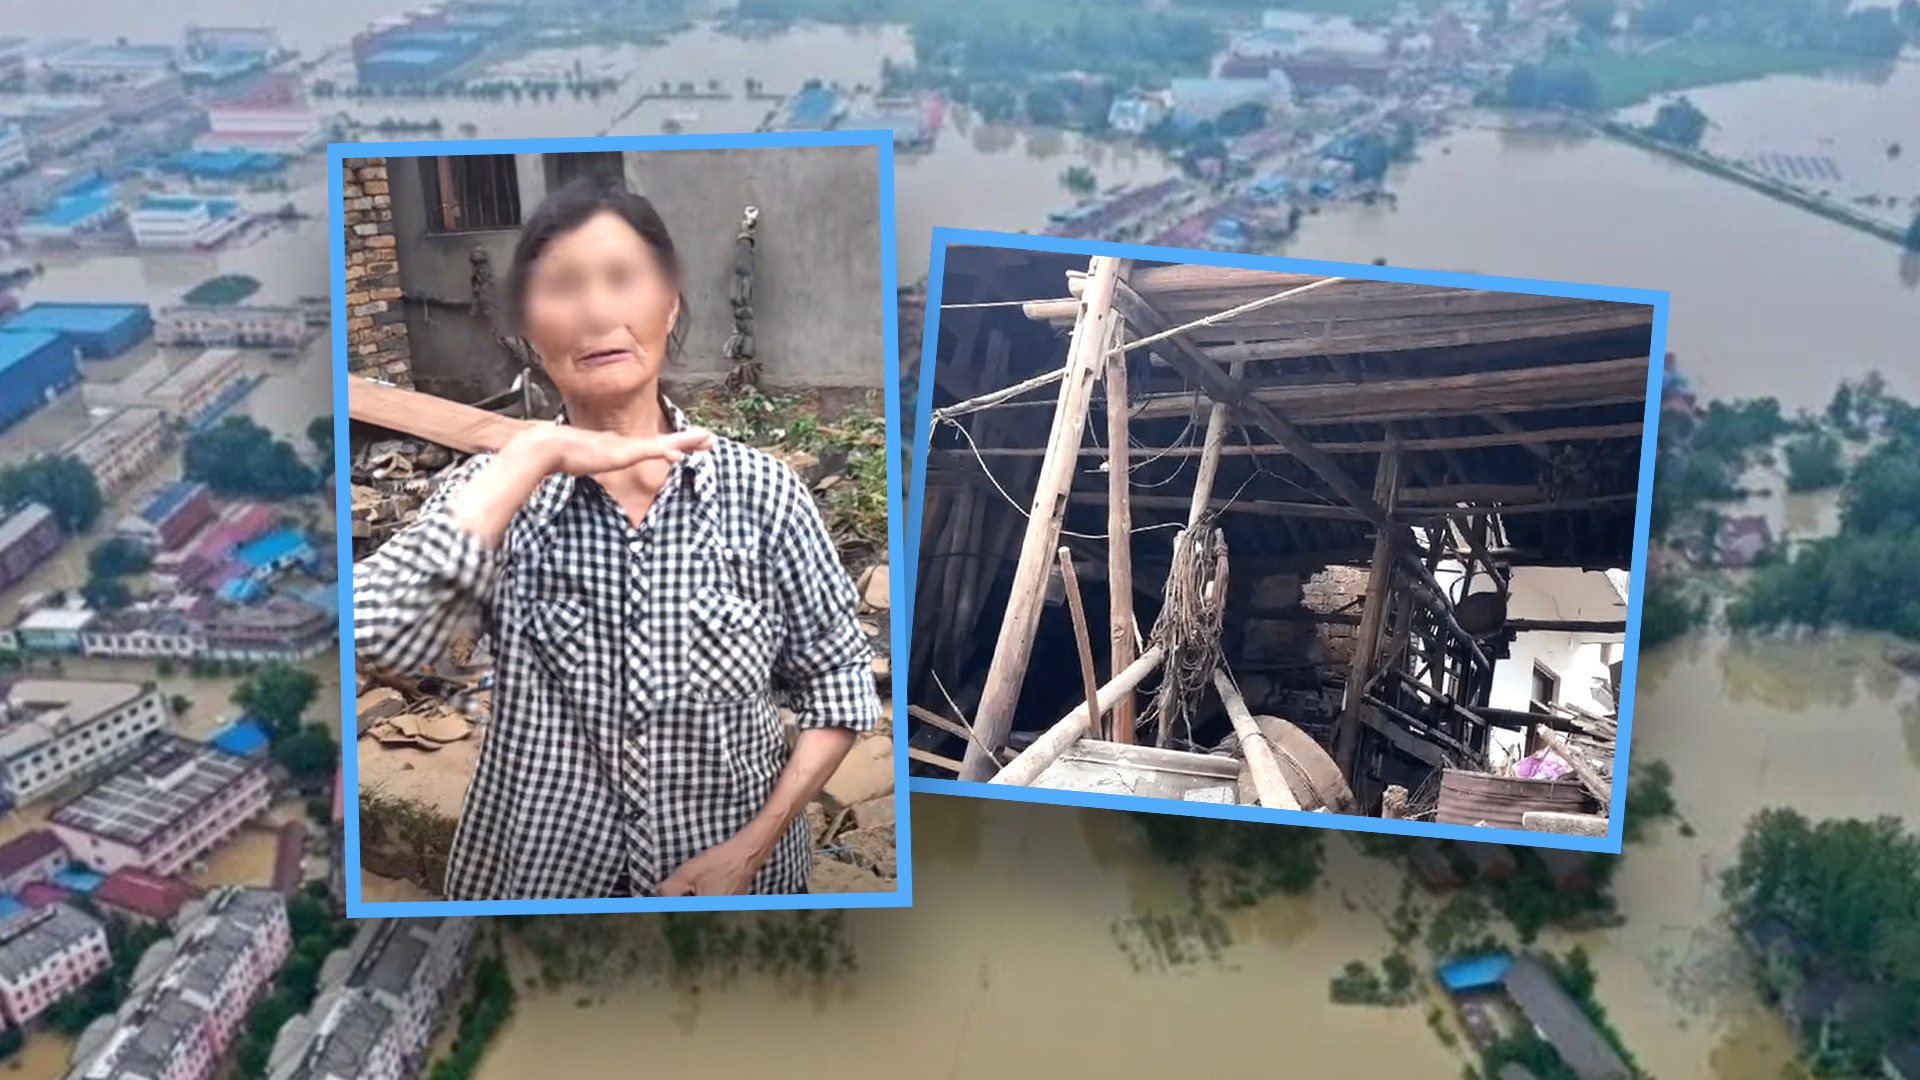 A 48-year-old man in China who swam to pluck his elderly mother from raging flood waters then lost his own life has been hailed as a hero on mainland social media. Photo: SCMP composite/Xinhua/Douyin/Jimu